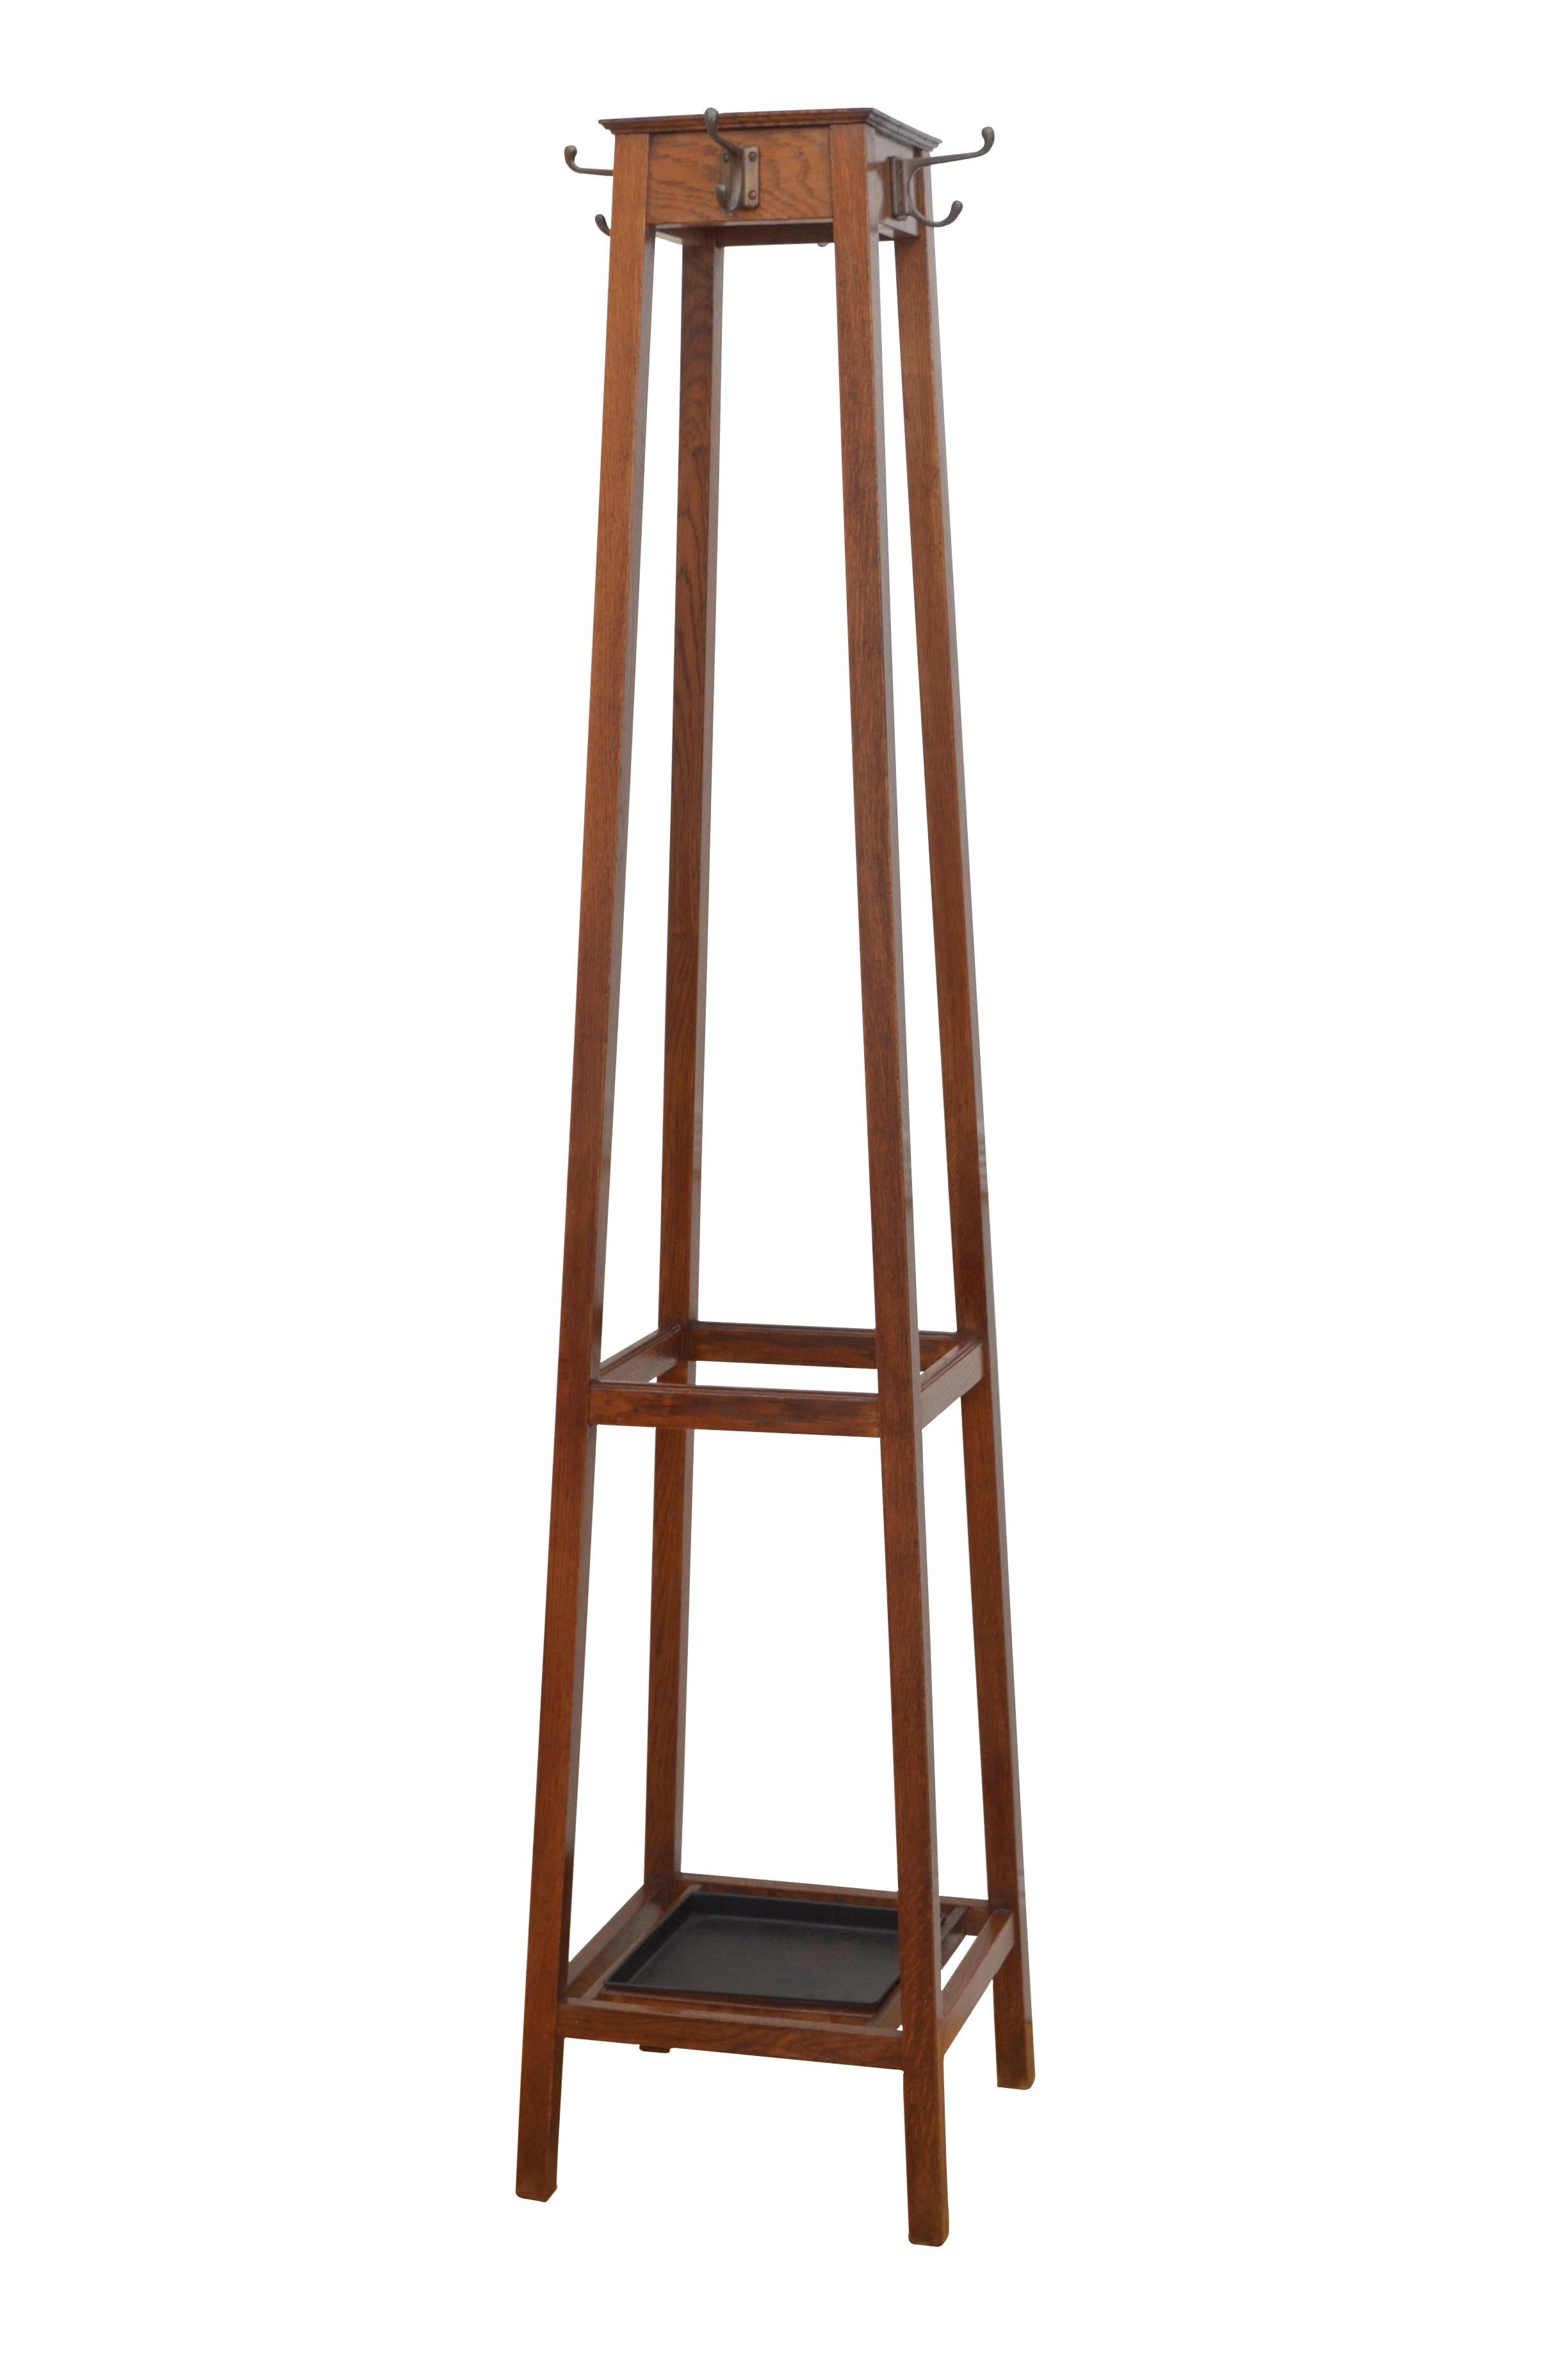 0592 A quality early 20th century solid oak hall stand with original copper plated hooks on four supports united by umbrella and walking sticks holder, with removable drip tray between. This antique coat stand retains its original finish which has